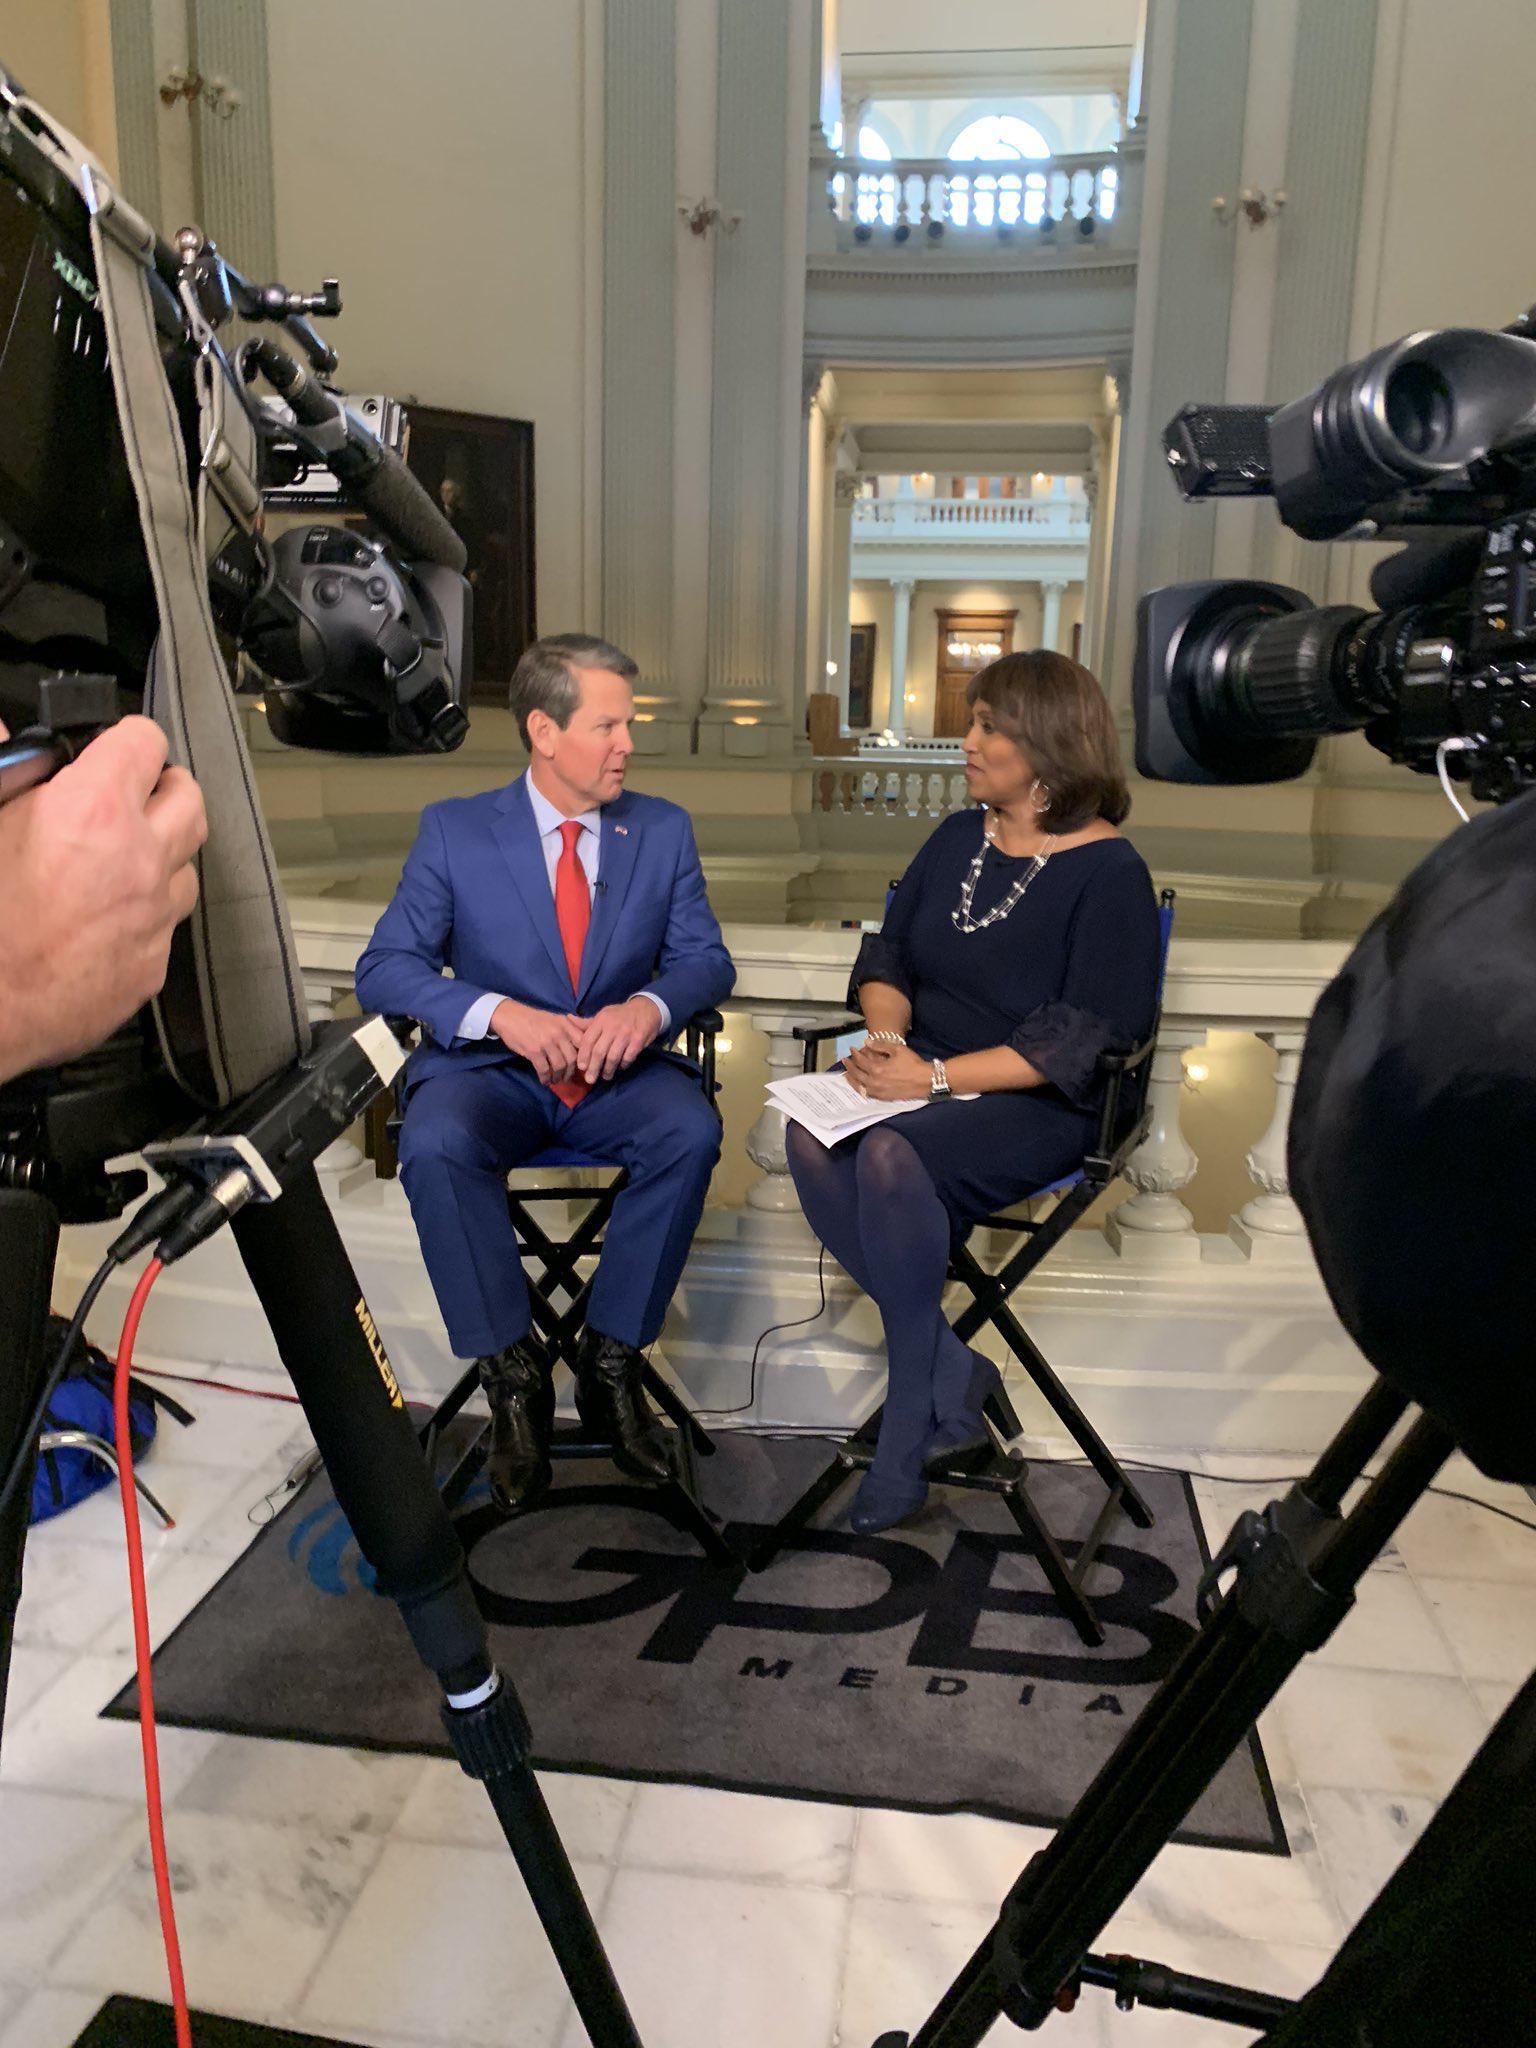 film tax credit discussed by Gov. Brian Kemp and Donna Lowry